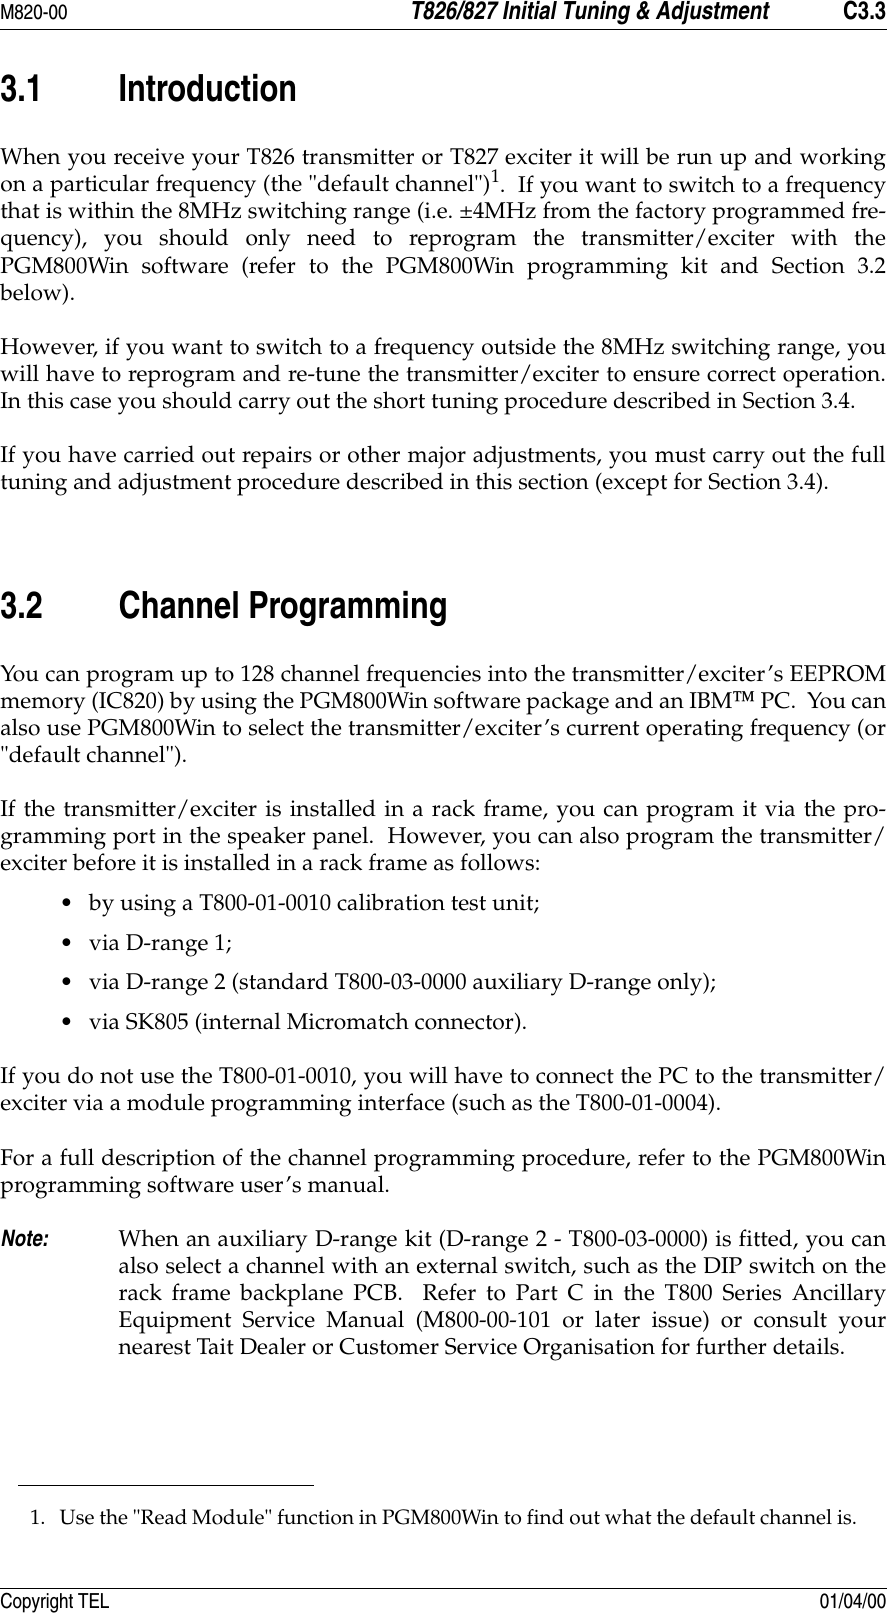 M820-00 T826/827 Initial Tuning &amp; Adjustment C3.3Copyright TEL 01/04/003.1 IntroductionWhen you receive your T826 transmitter or T827 exciter it will be run up and workingon a particular frequency (the &quot;default channel&quot;)1.  If you want to switch to a frequencythat is within the 8MHz switching range (i.e. ±4MHz from the factory programmed fre-quency), you should only need to reprogram the transmitter/exciter with thePGM800Win software (refer to the PGM800Win programming kit and Section 3.2below).  However, if you want to switch to a frequency outside the 8MHz switching range, youwill have to reprogram and re-tune the transmitter/exciter to ensure correct operation.In this case you should carry out the short tuning procedure described in Section 3.4.If you have carried out repairs or other major adjustments, you must carry out the fulltuning and adjustment procedure described in this section (except for Section 3.4).  3.2 Channel ProgrammingYou can program up to 128 channel frequencies into the transmitter/exciter’s EEPROMmemory (IC820) by using the PGM800Win software package and an IBM PC.  You canalso use PGM800Win to select the transmitter/exciter’s current operating frequency (or&quot;default channel&quot;).If the transmitter/exciter is installed in a rack frame, you can program it via the pro-gramming port in the speaker panel.  However, you can also program the transmitter/exciter before it is installed in a rack frame as follows:• by using a T800-01-0010 calibration test unit;•via D-range 1;• via D-range 2 (standard T800-03-0000 auxiliary D-range only);• via SK805 (internal Micromatch connector).If you do not use the T800-01-0010, you will have to connect the PC to the transmitter/exciter via a module programming interface (such as the T800-01-0004).For a full description of the channel programming procedure, refer to the PGM800Winprogramming software user’s manual.Note: When an auxiliary D-range kit (D-range 2 - T800-03-0000) is fitted, you canalso select a channel with an external switch, such as the DIP switch on therack frame backplane PCB.  Refer to Part C in the T800 Series AncillaryEquipment Service Manual (M800-00-101 or later issue) or consult yournearest Tait Dealer or Customer Service Organisation for further details.1. Use the &quot;Read Module&quot; function in PGM800Win to find out what the default channel is.